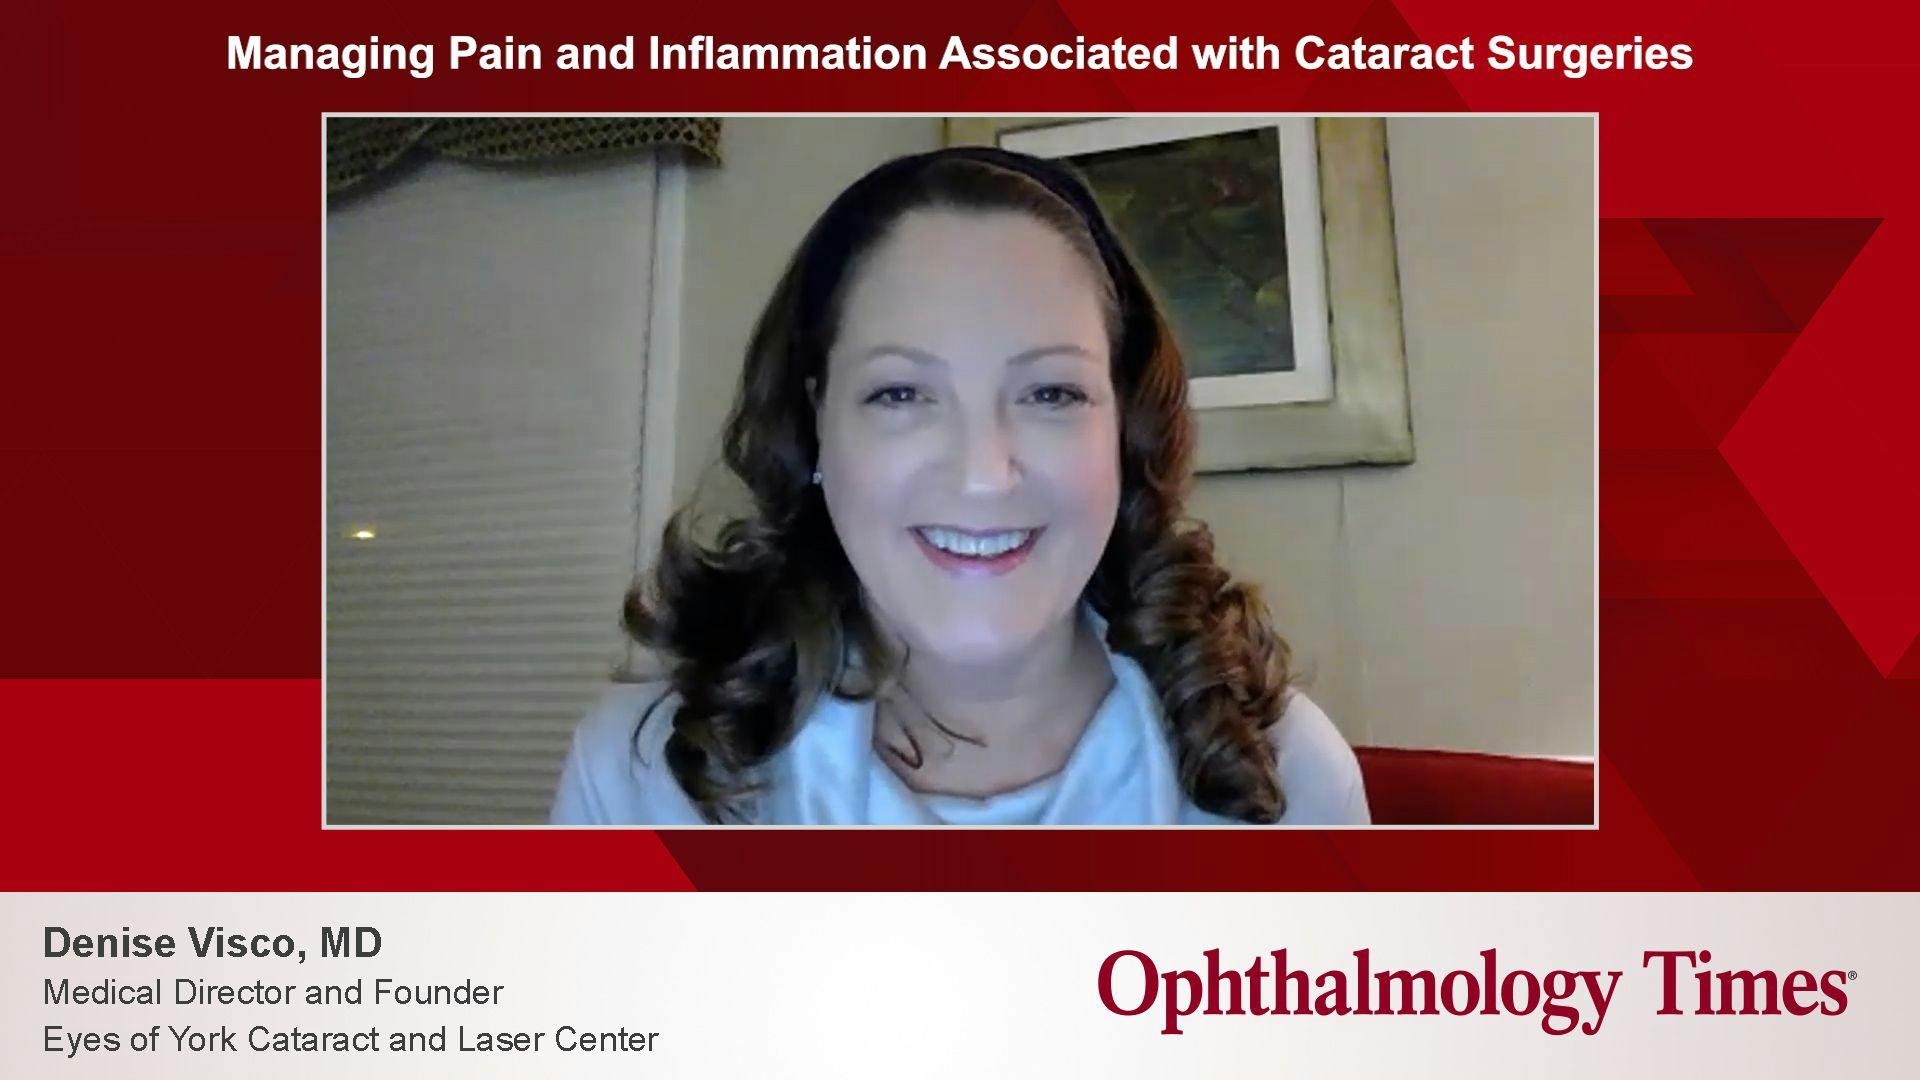 Managing Pain and Inflammation Associated with Cataract Surgeries